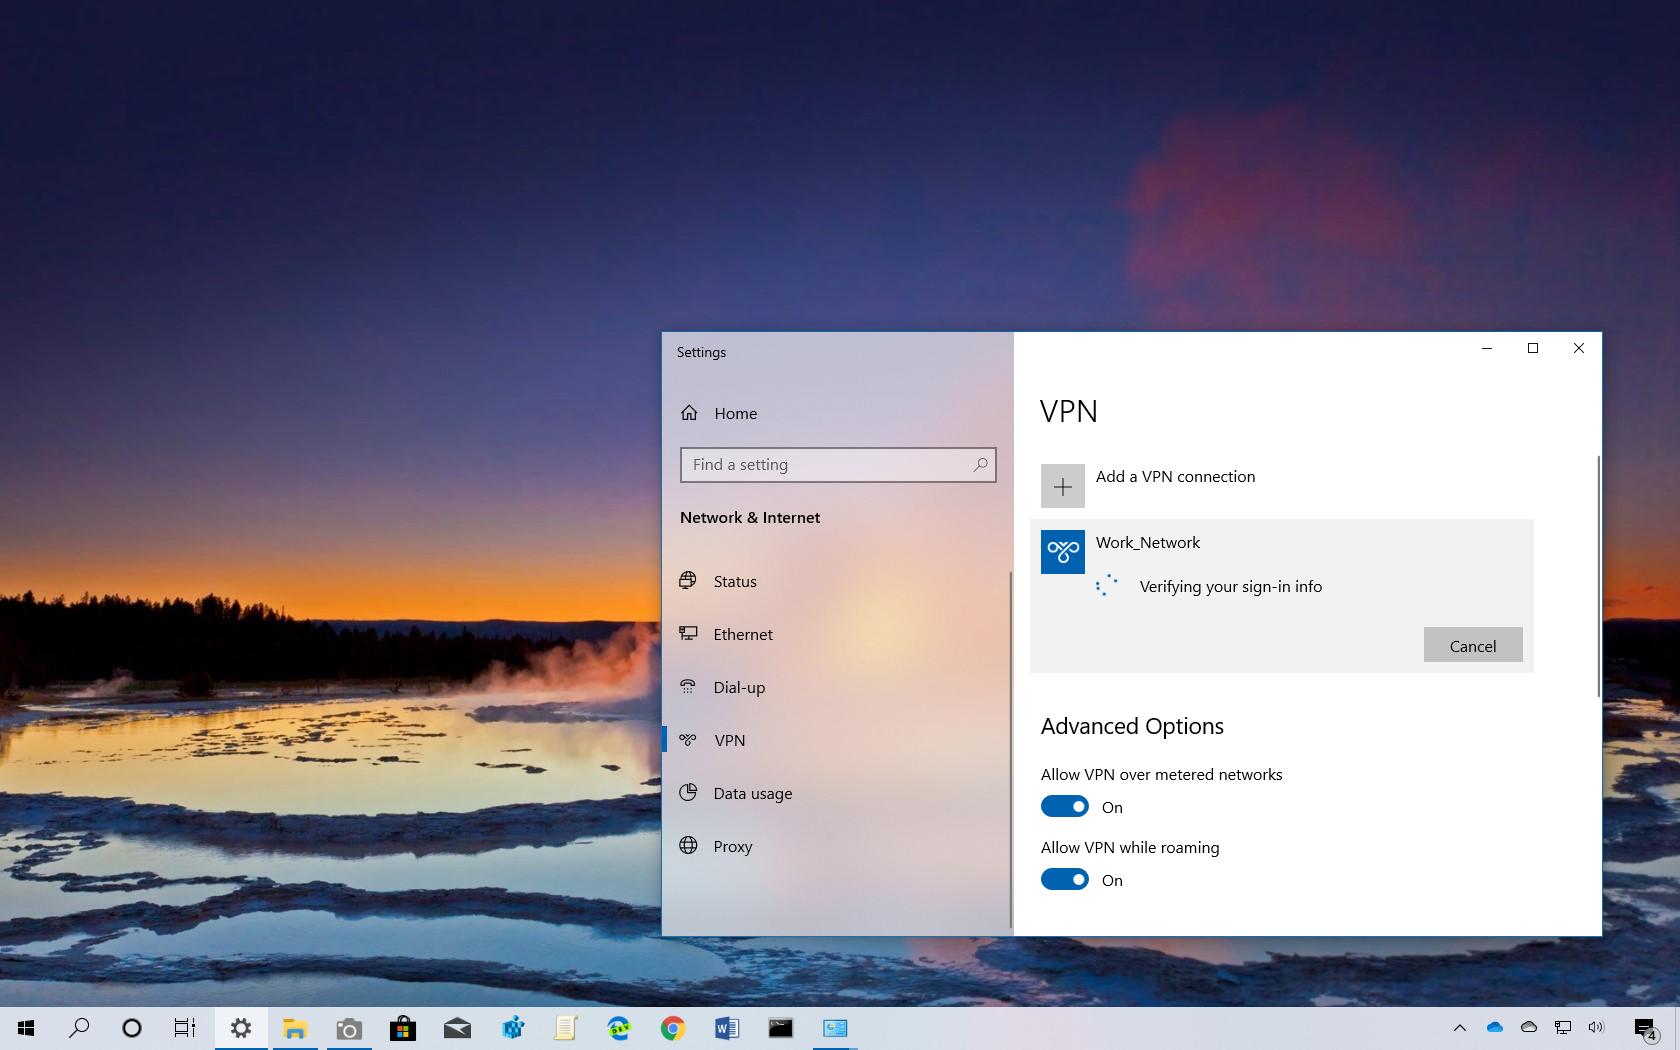 How to set up VPN connection on Windows 10 - Pureinfotech